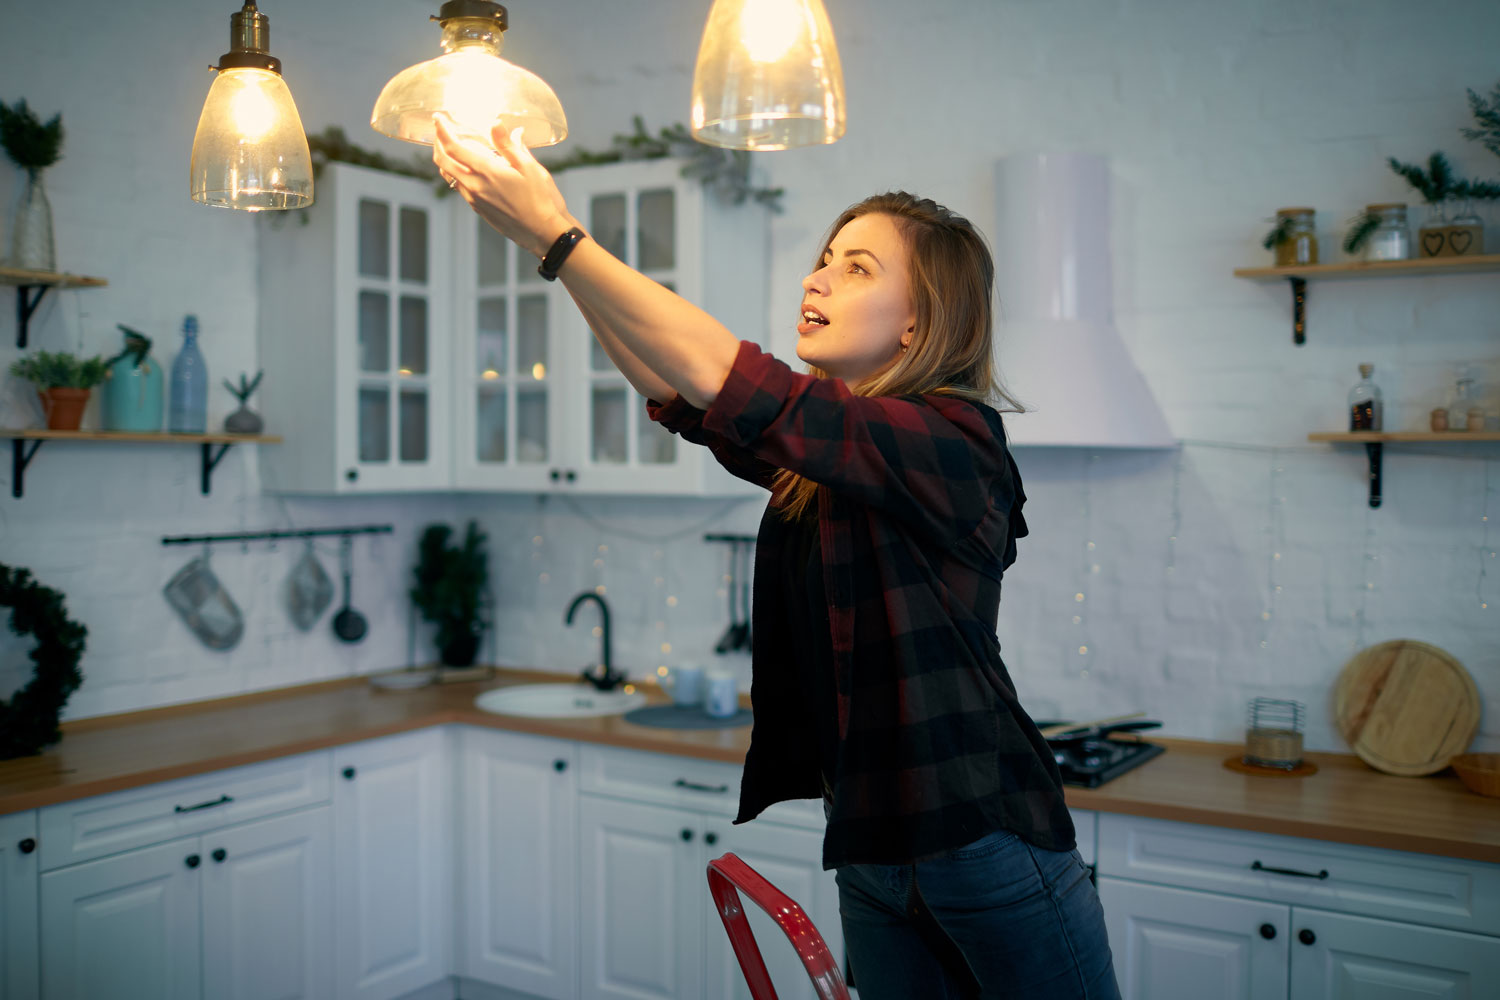 Benefits of Switching to LED Lighting